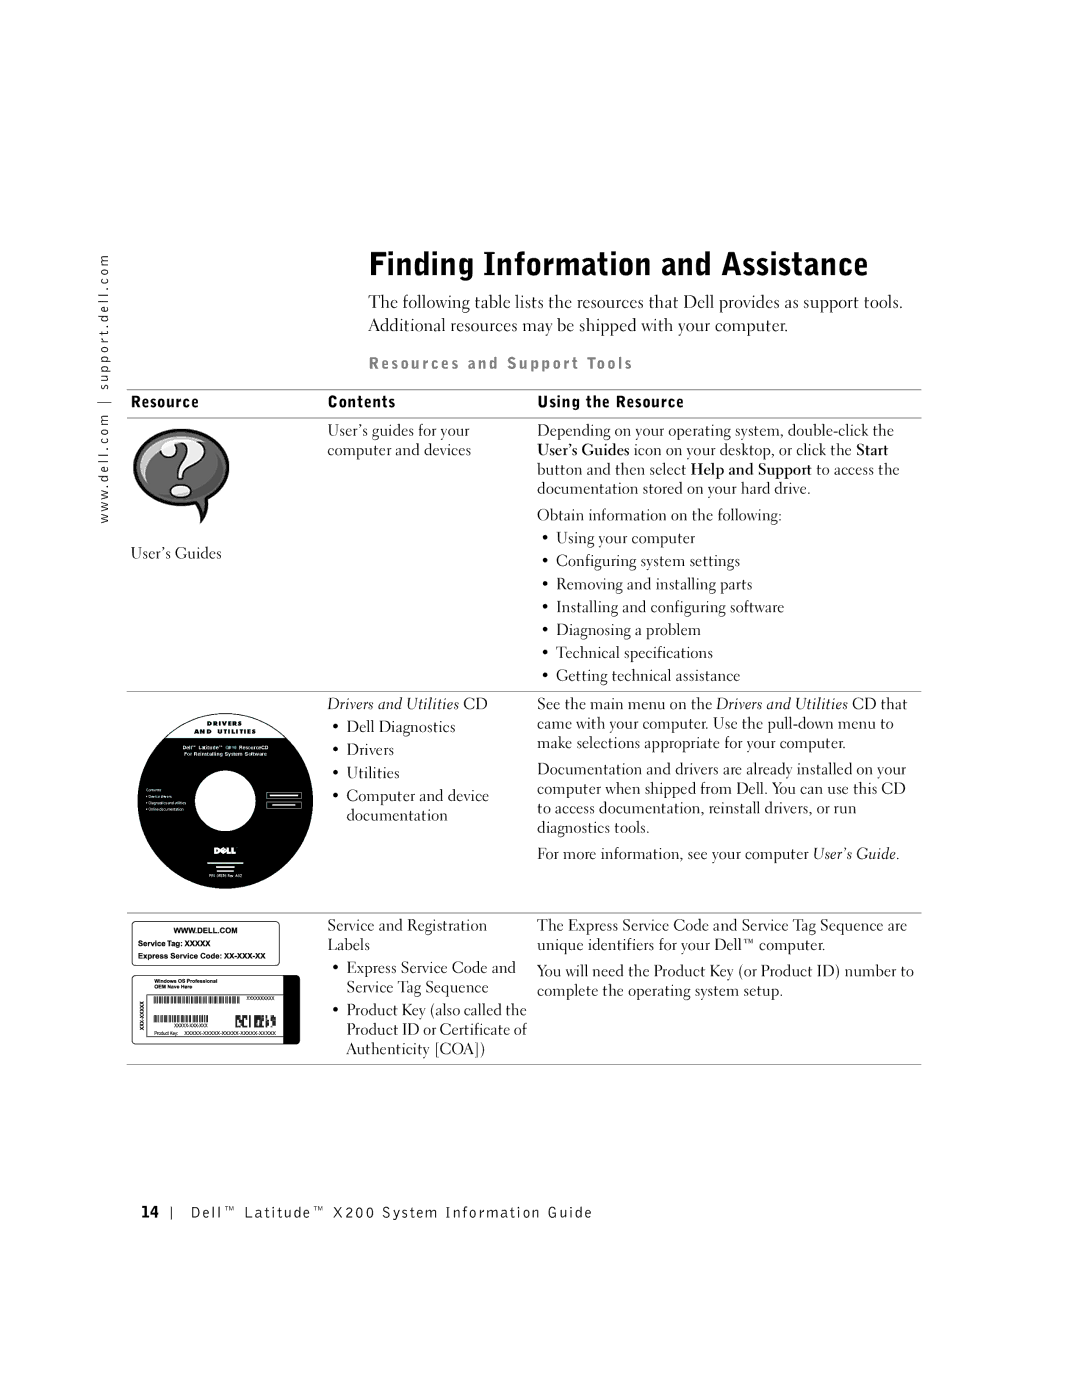 LeapFrog PP03S manual Finding Information and Assistance, Contents Using the Resource 